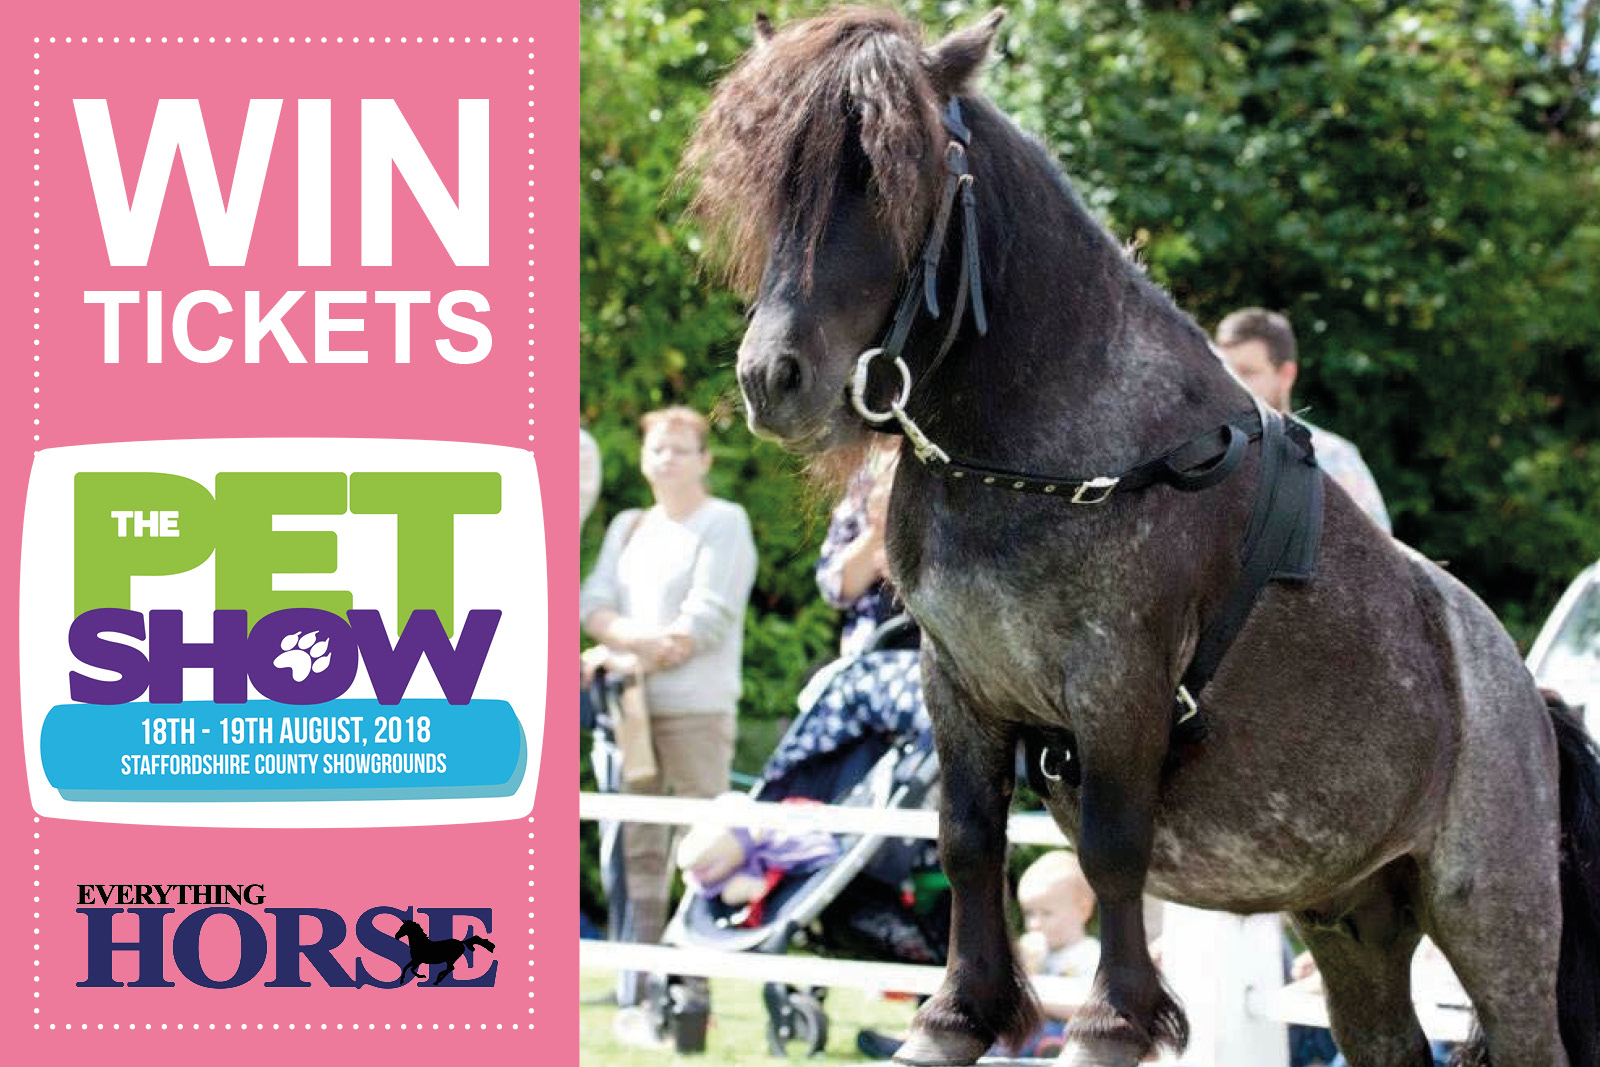 win tickets to The Pet Show